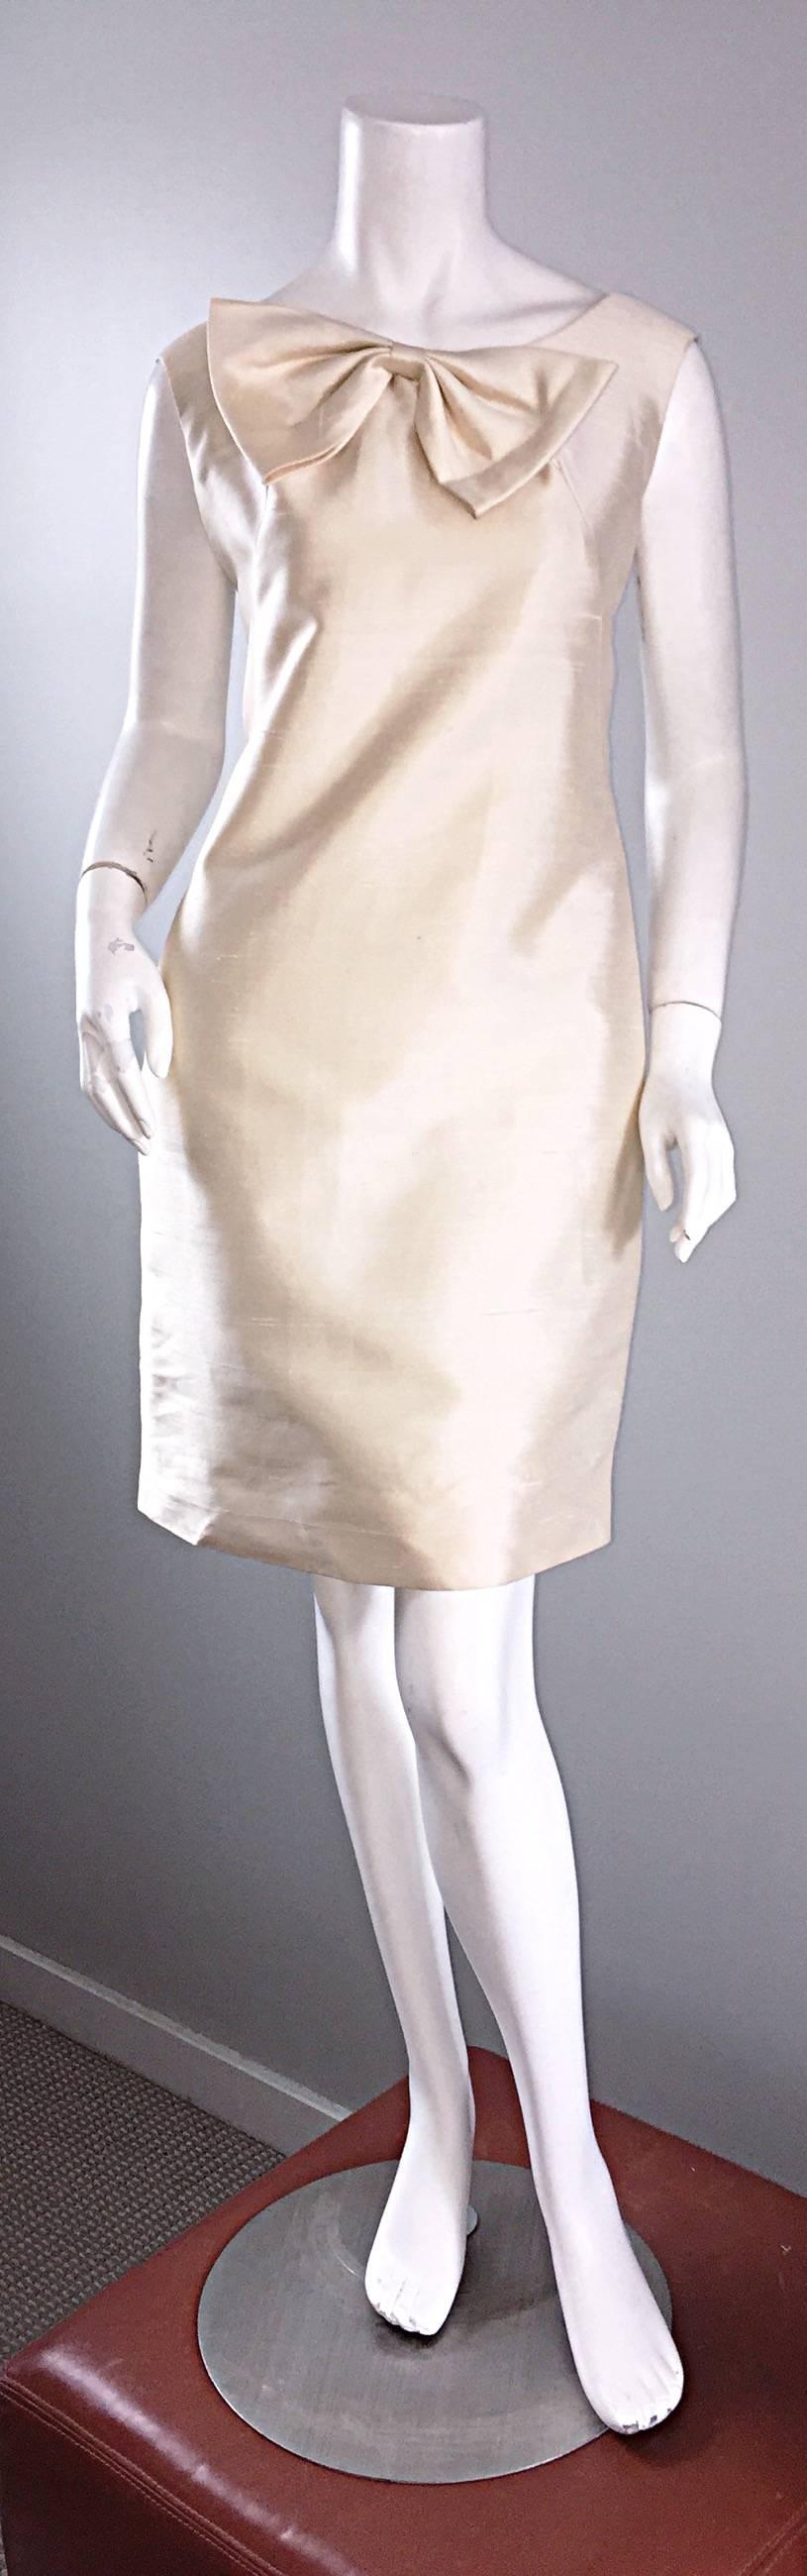 Amazingly chic 60s vintage ivory raw silk couture quality shift dress!  Highest quality silk, with oversized bow at the side collar. Zips up the back, with hook-and-eye closure. Incredibly well made. Absolutely stunning on, and flatters every shape!